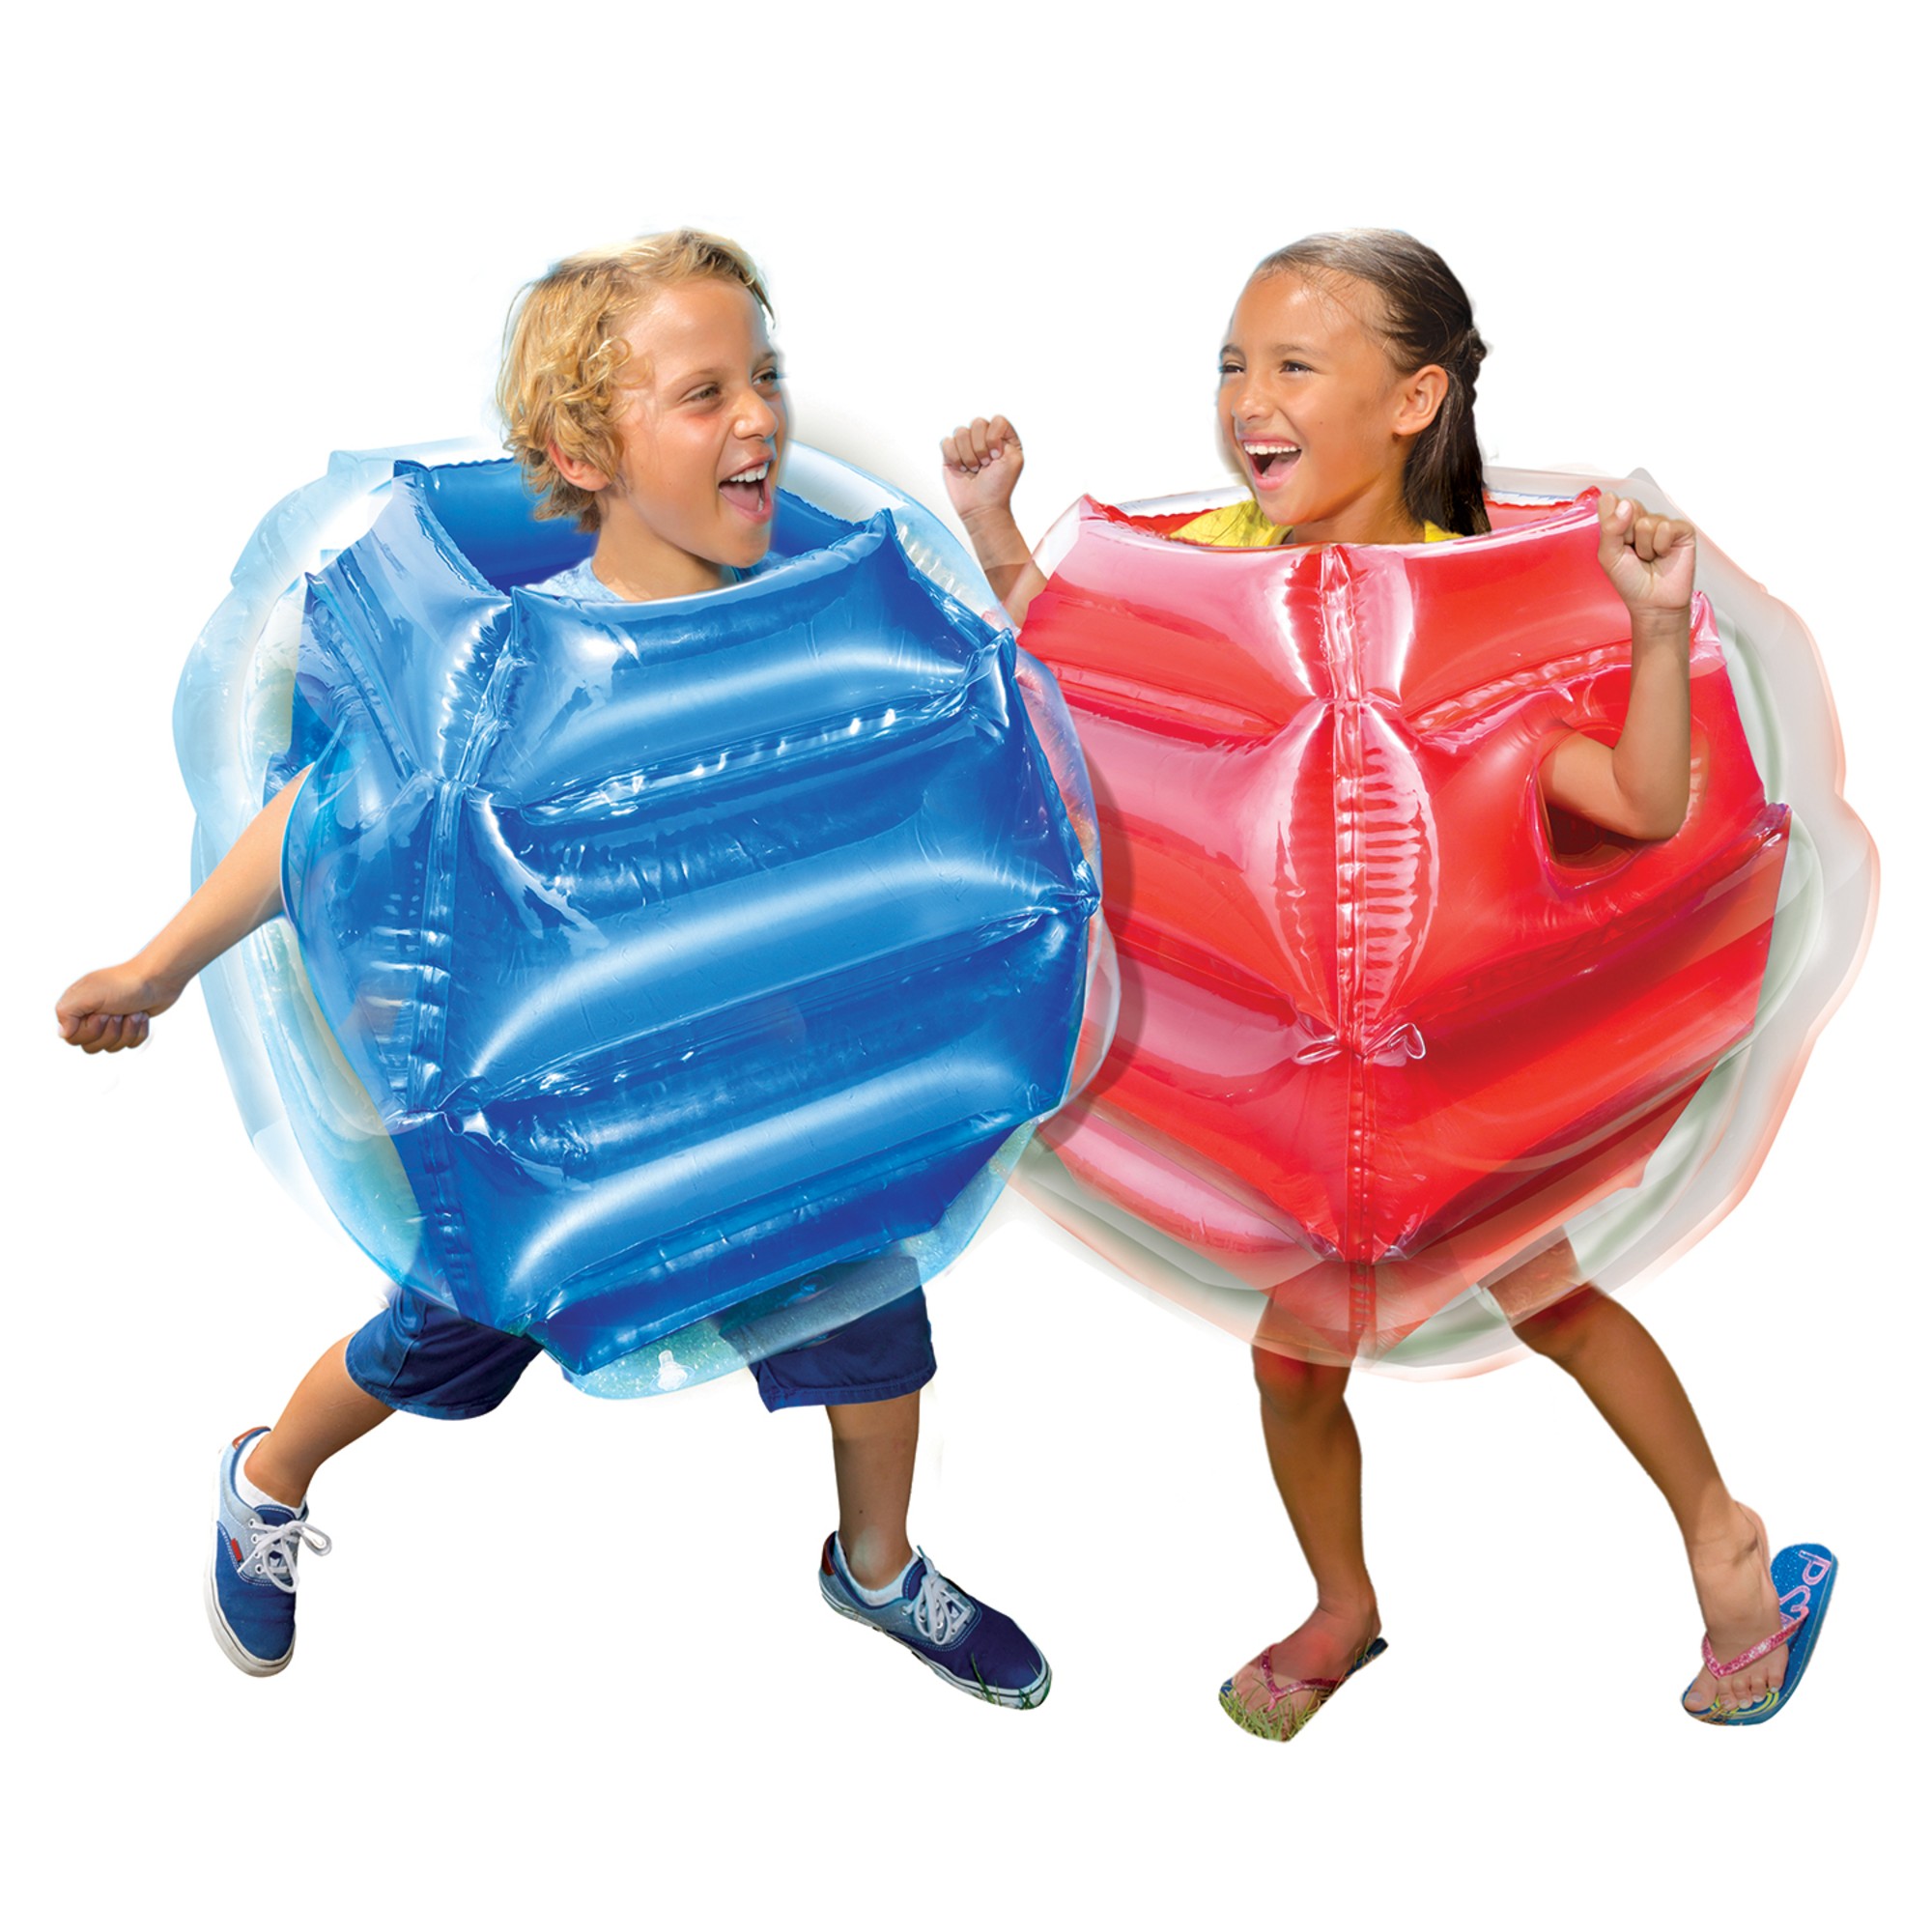 Banzai Bump N Bounce Plastic Body Bumpers in Red & Blue, 2 Bumpers, Kids Toy, 4+ - image 3 of 3